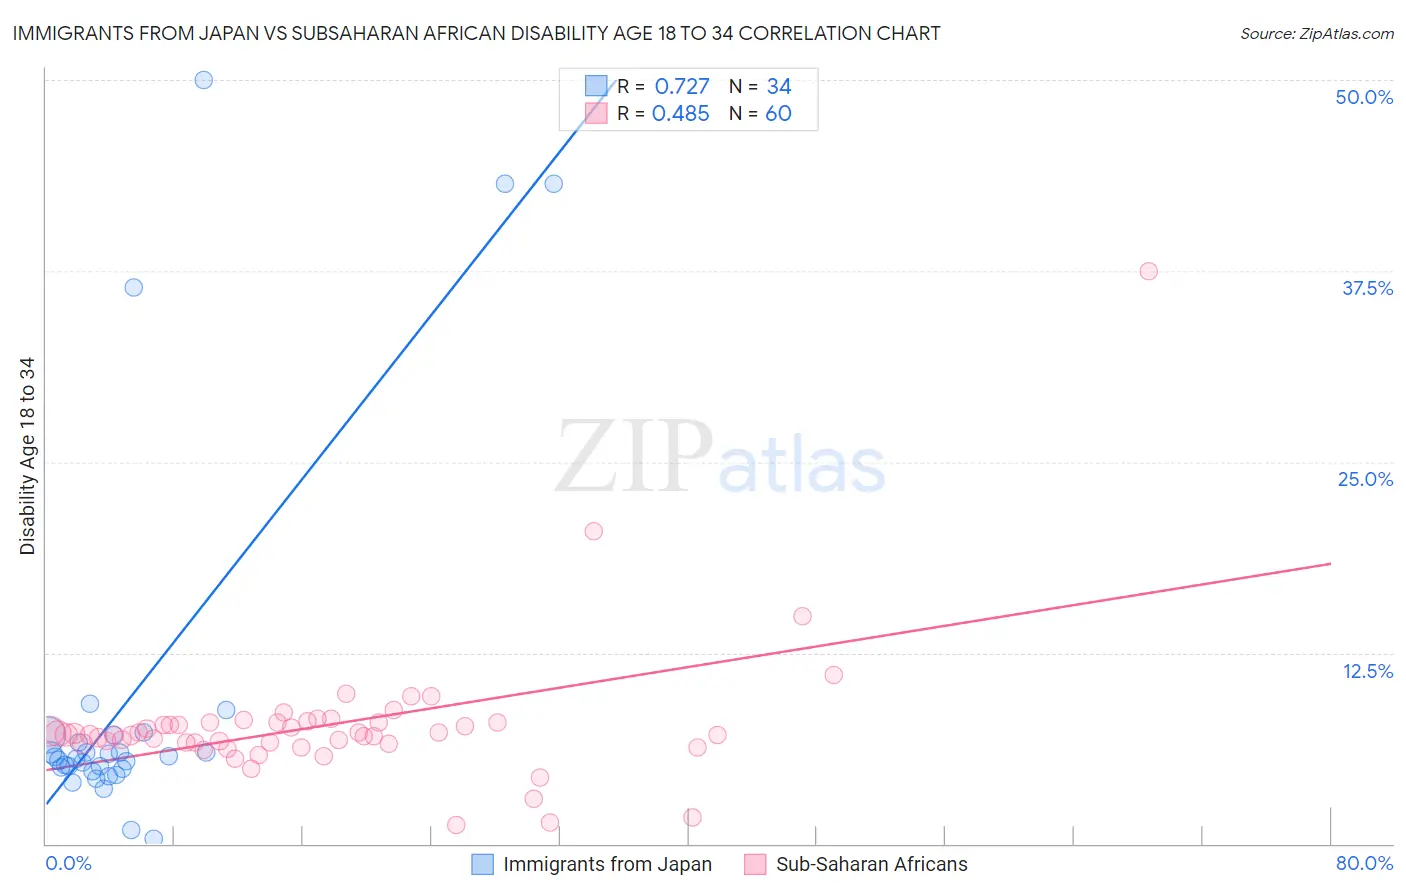 Immigrants from Japan vs Subsaharan African Disability Age 18 to 34